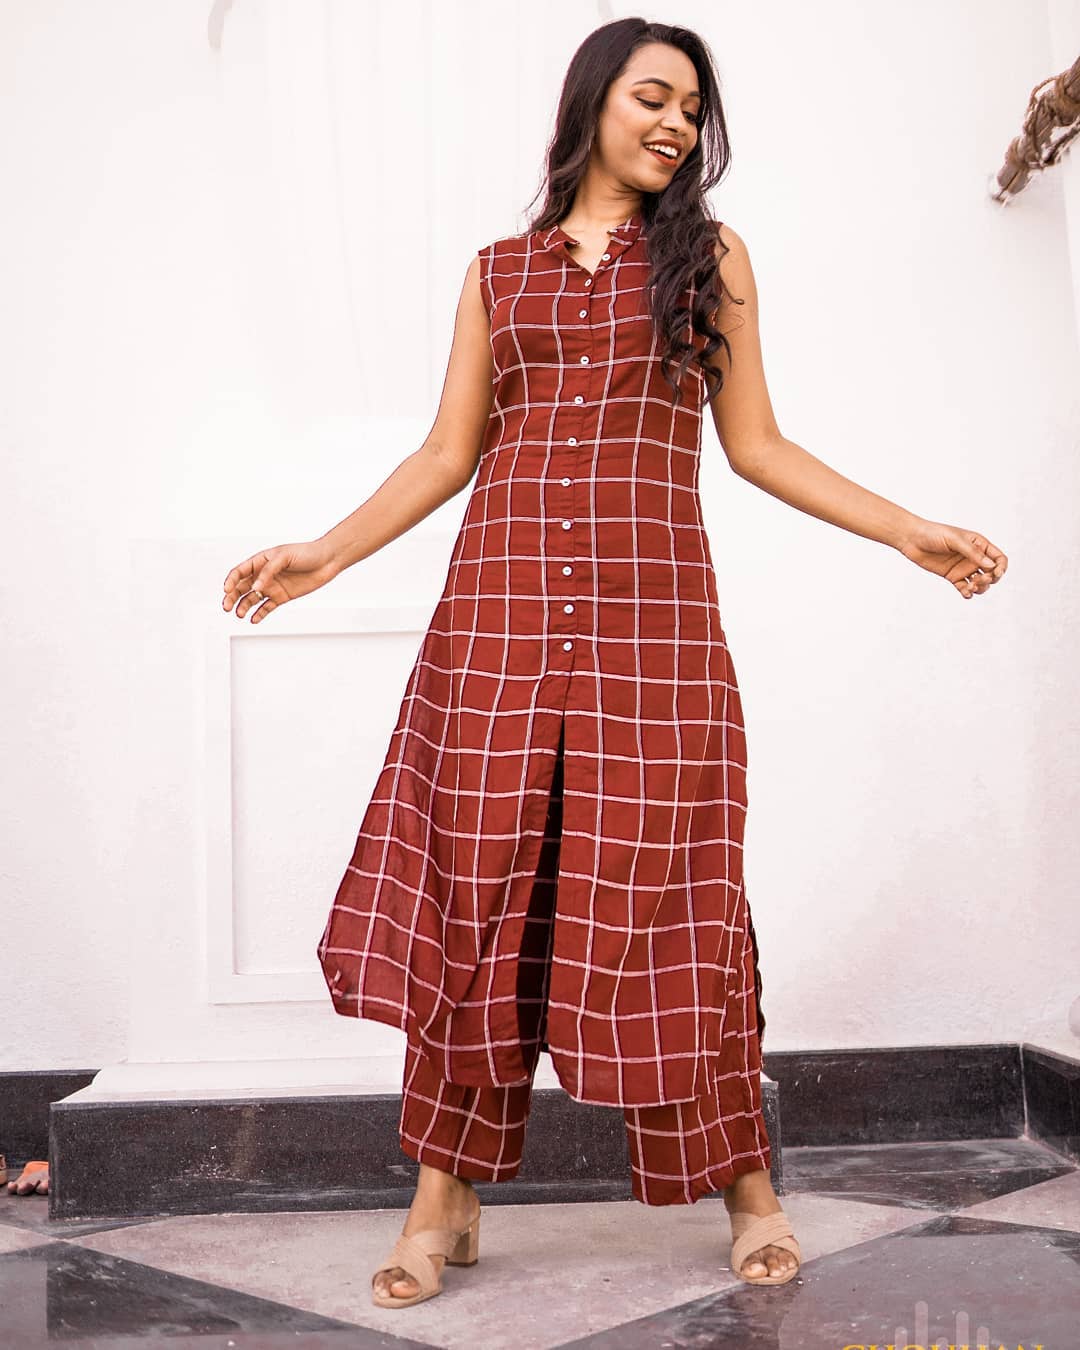 MYNTRA - Ethnic coordinates are a popular trend & geometric patterns make them all the more fun. 📸@grubmode
Look up style code: 8773391
For more on-point looks, styling hacks and fashion advice, tune...